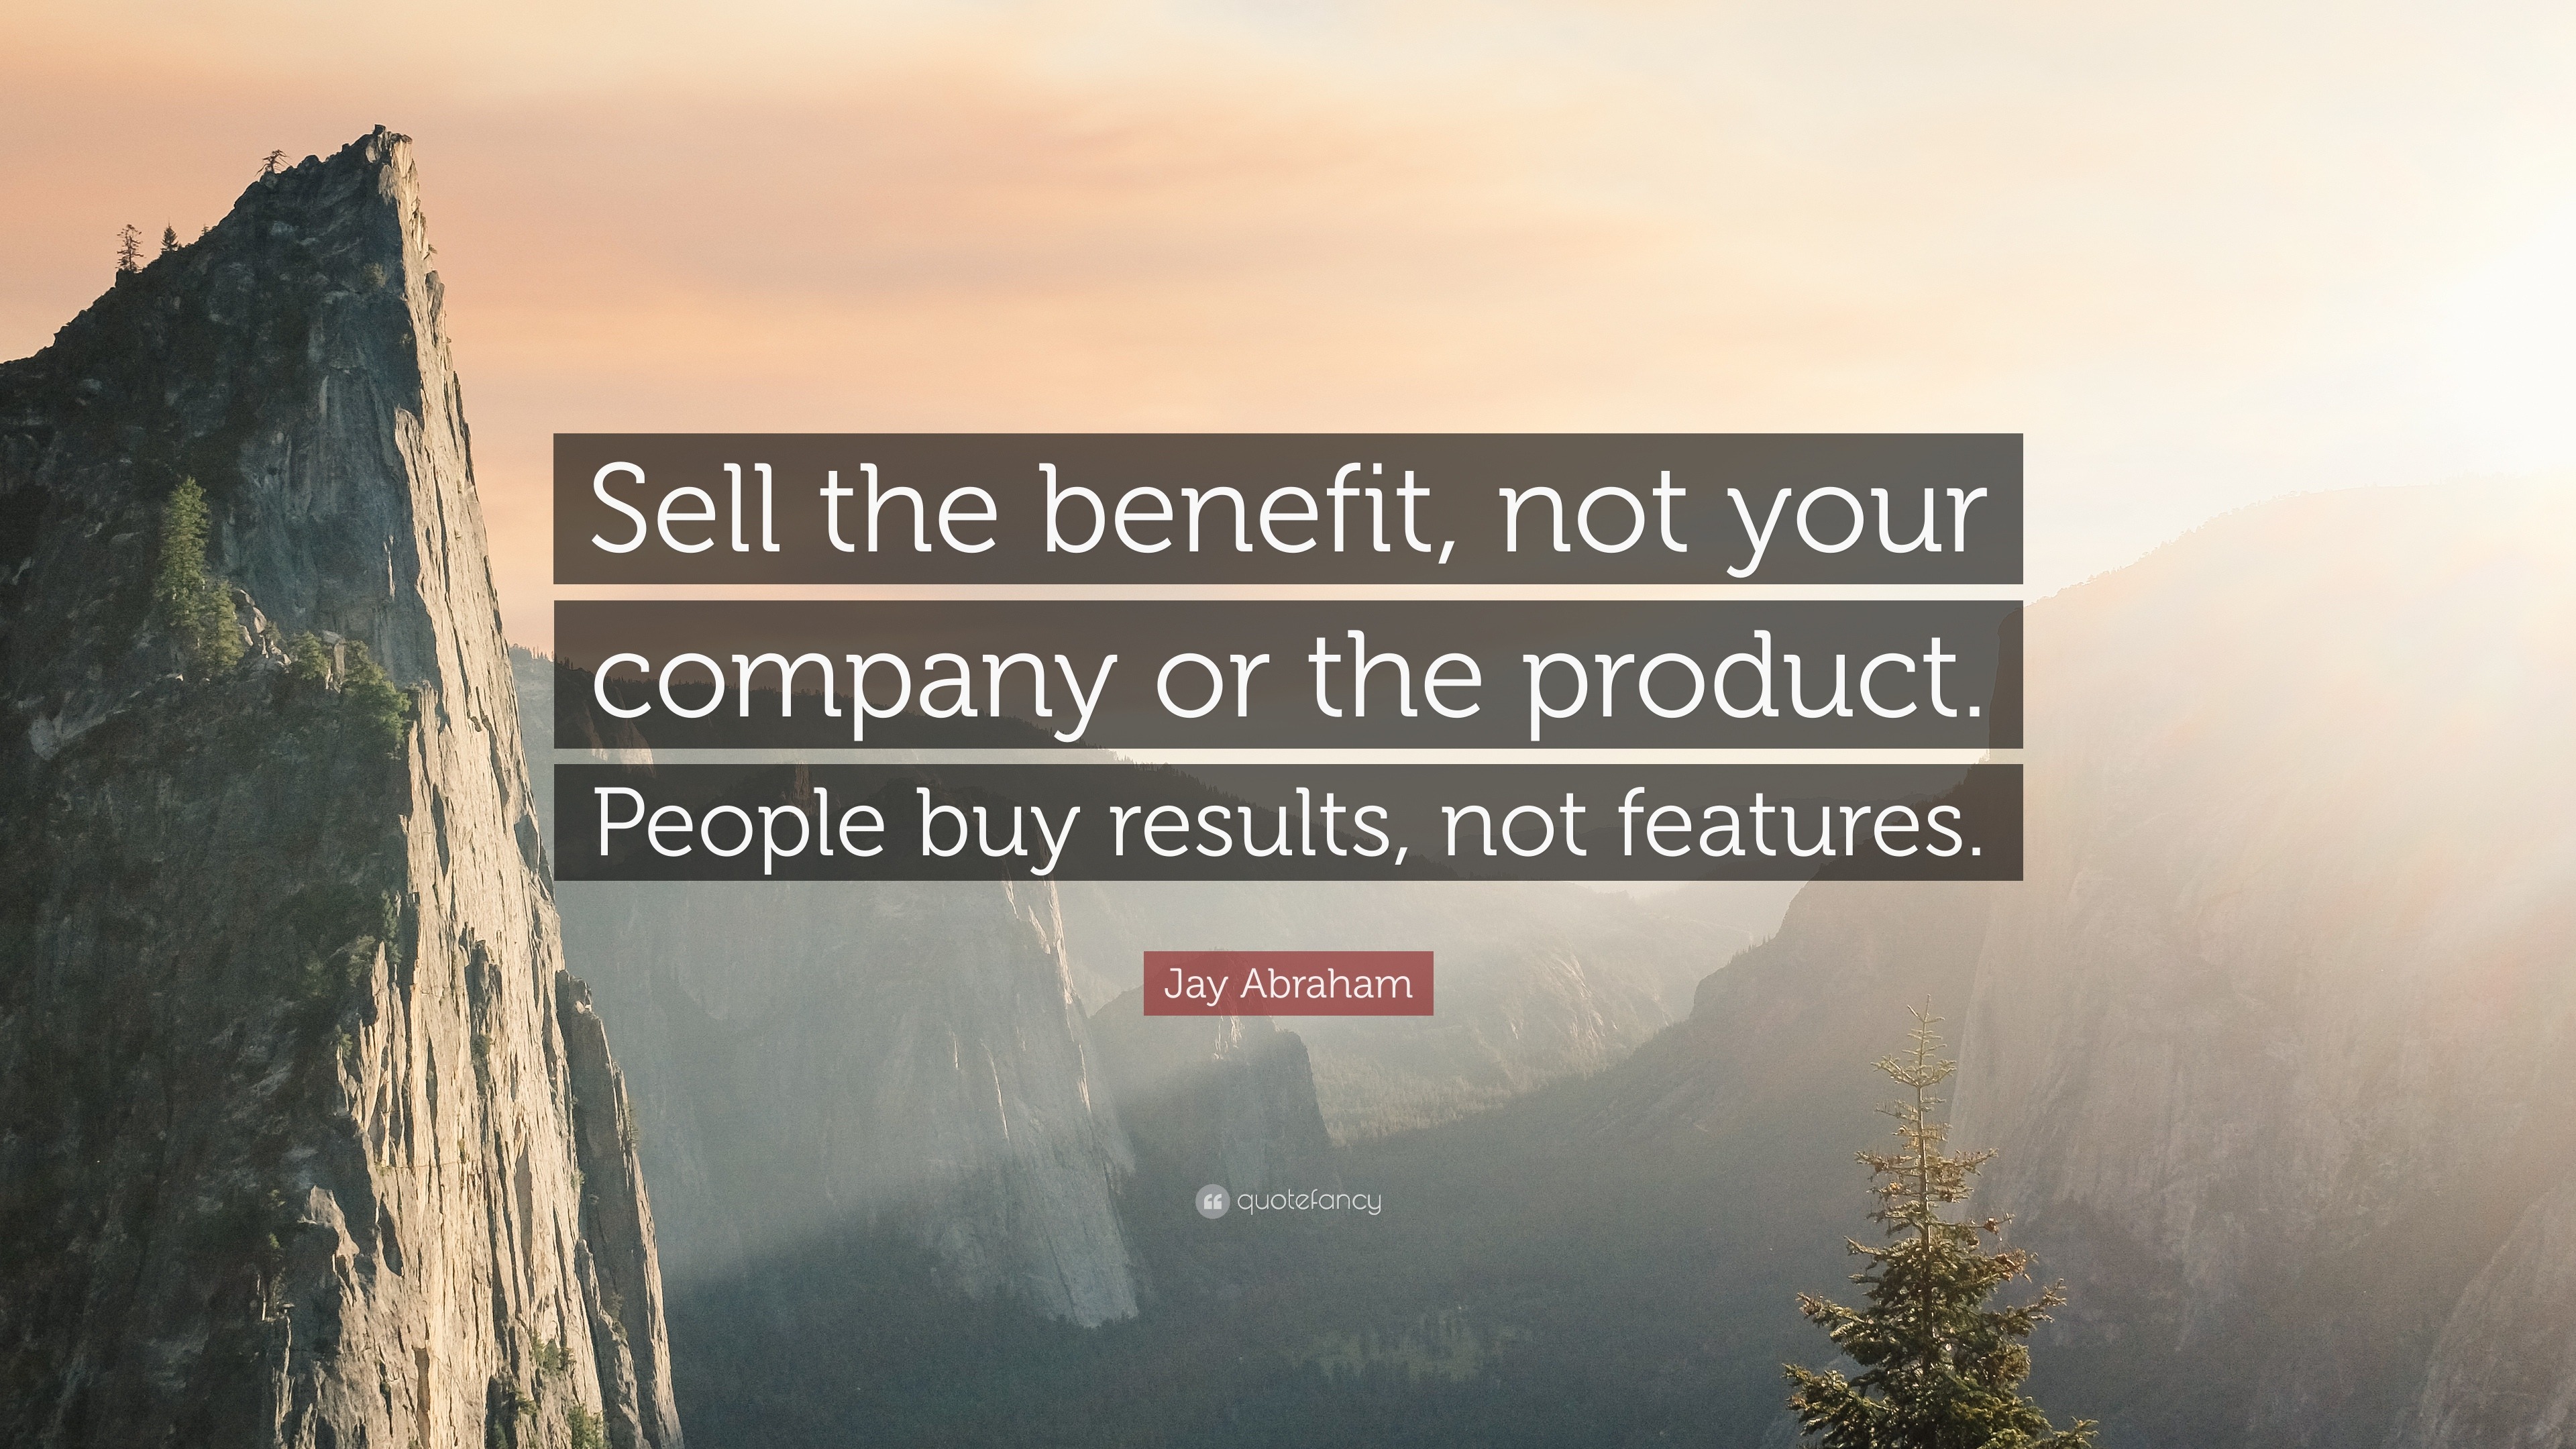 Jay Abraham Quote Sell the benefit not your company or 